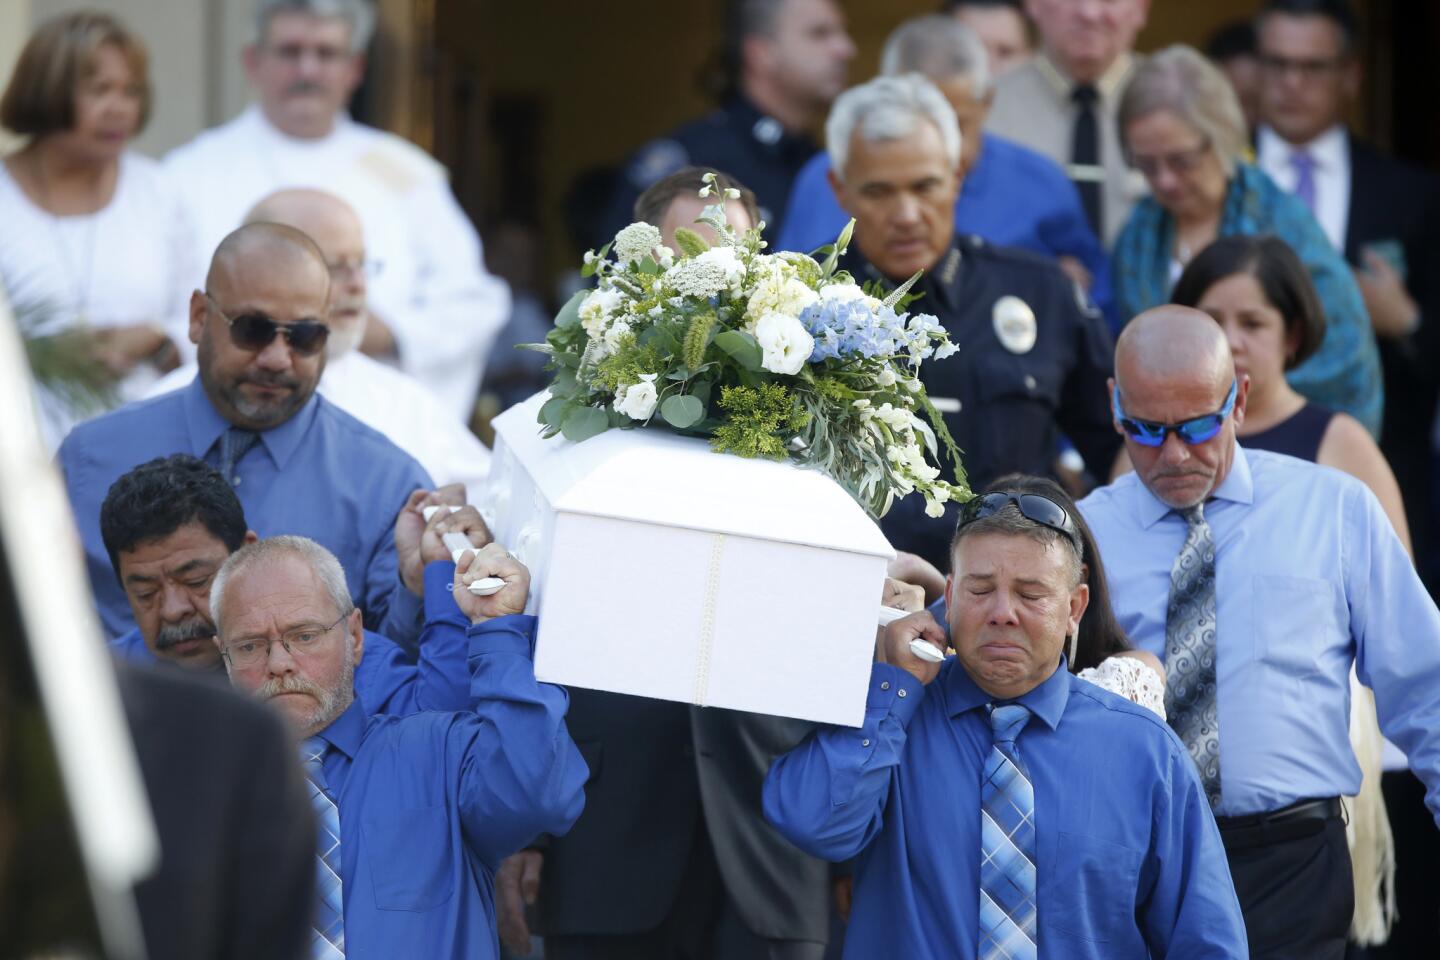 Funeral for 5-year-old